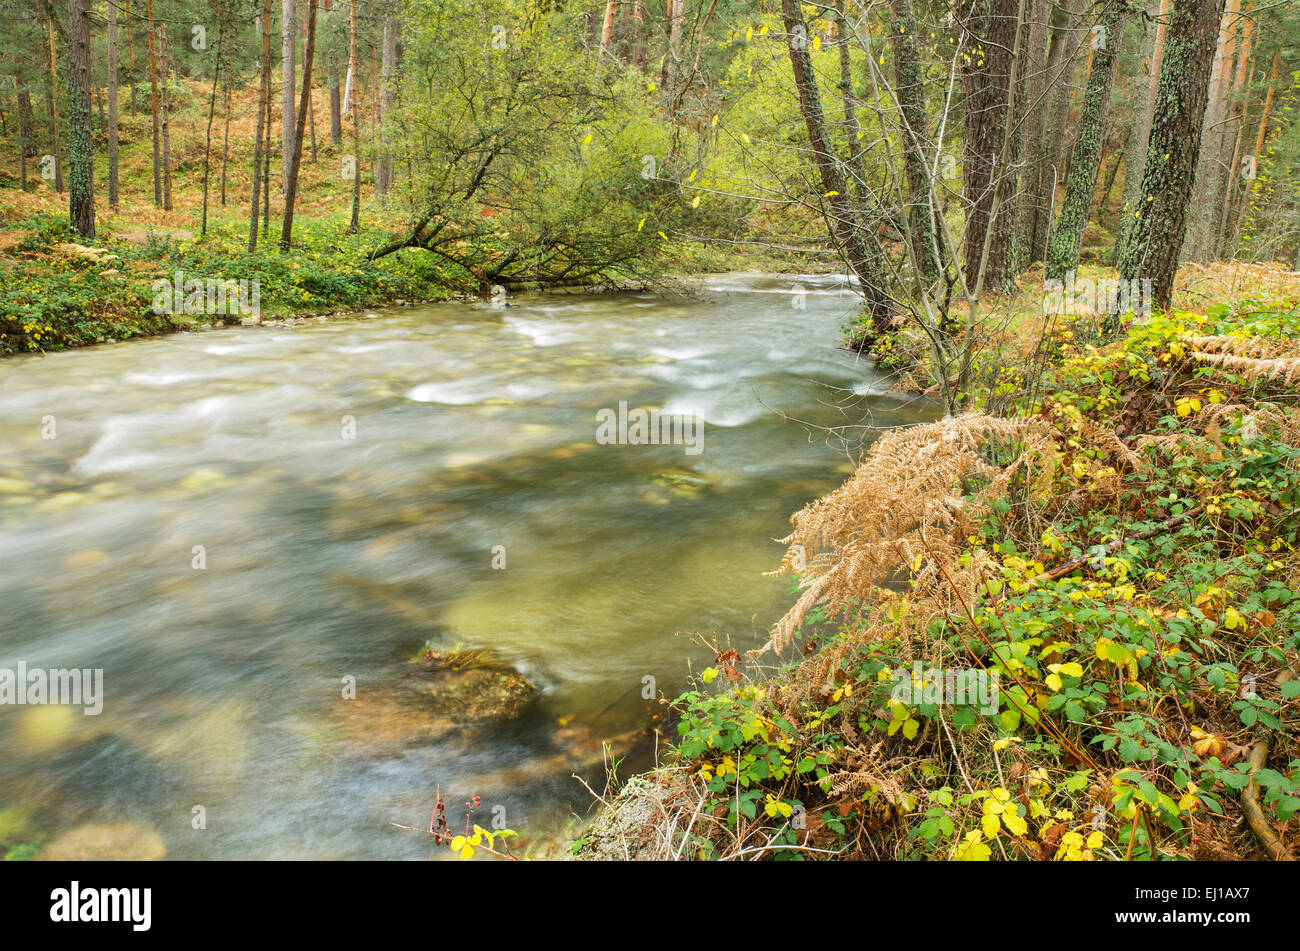 Scenic view of a river in the forest in Boca del Asno natural park on a rainy day in Segovia, Spain. Stock Photo